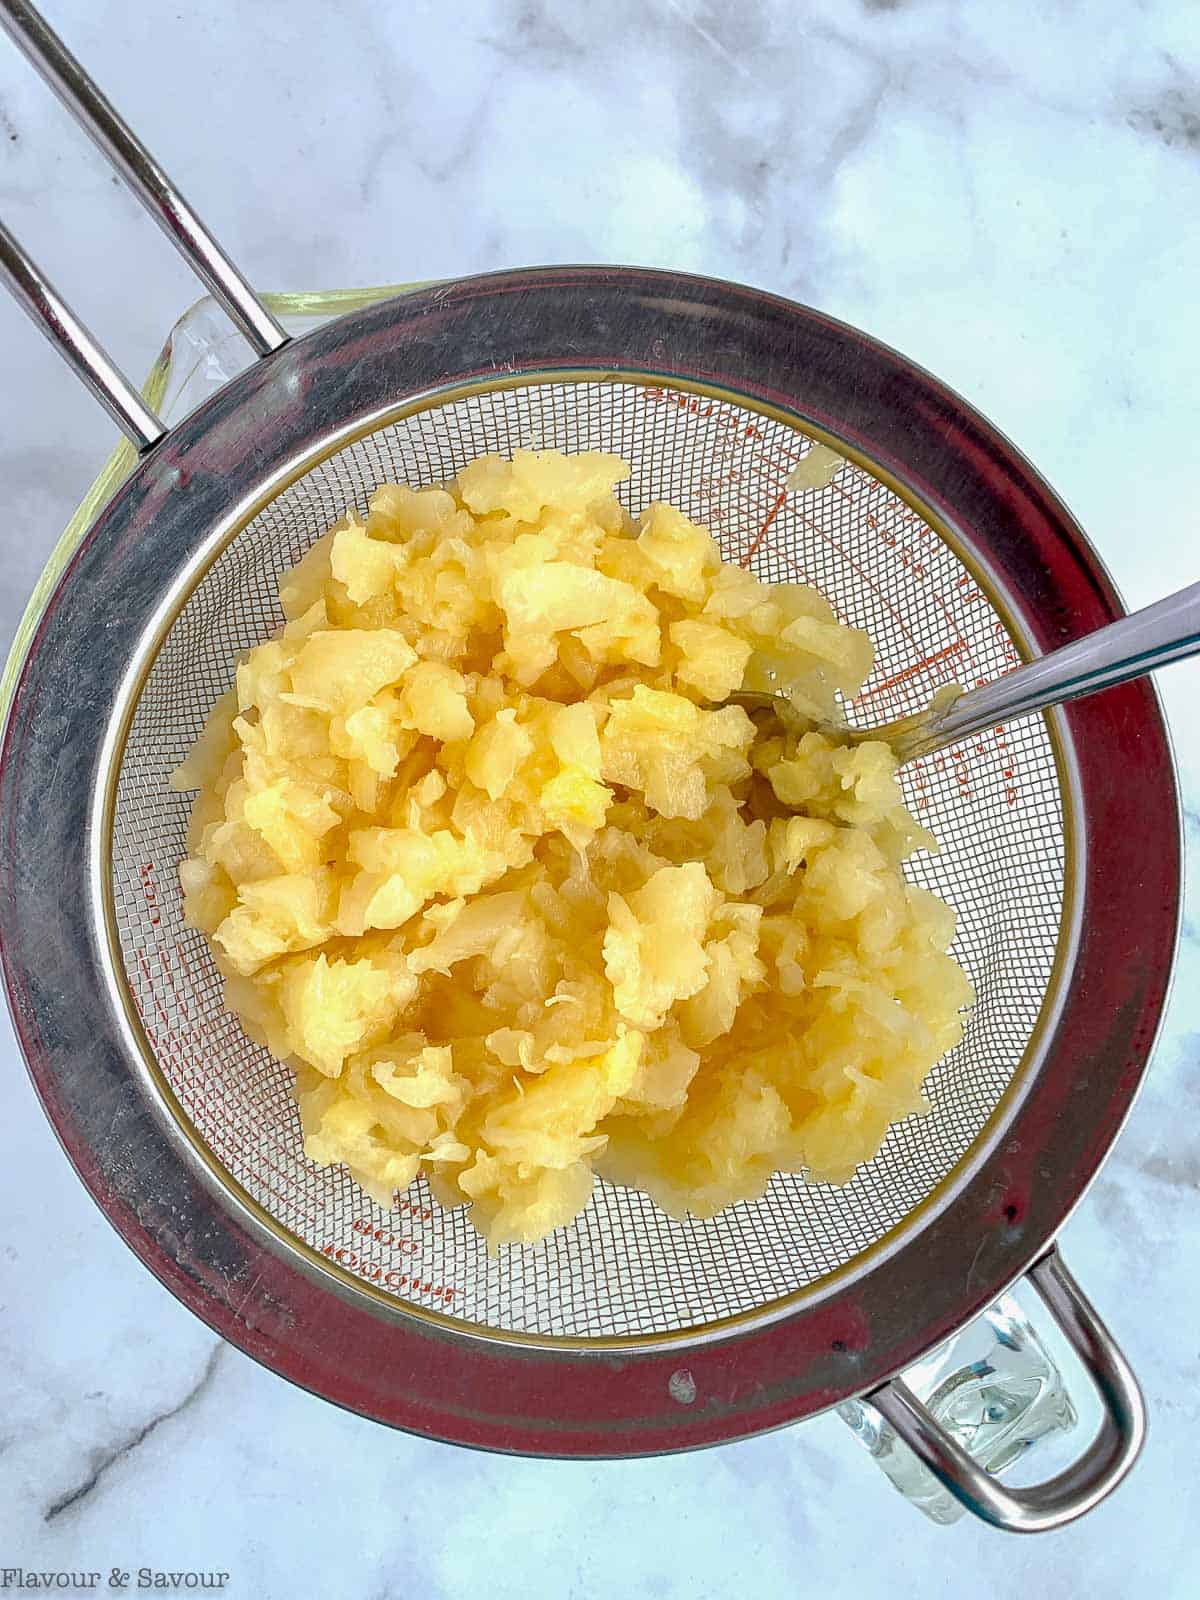 Draining crushed canned pineapple in a sieve.